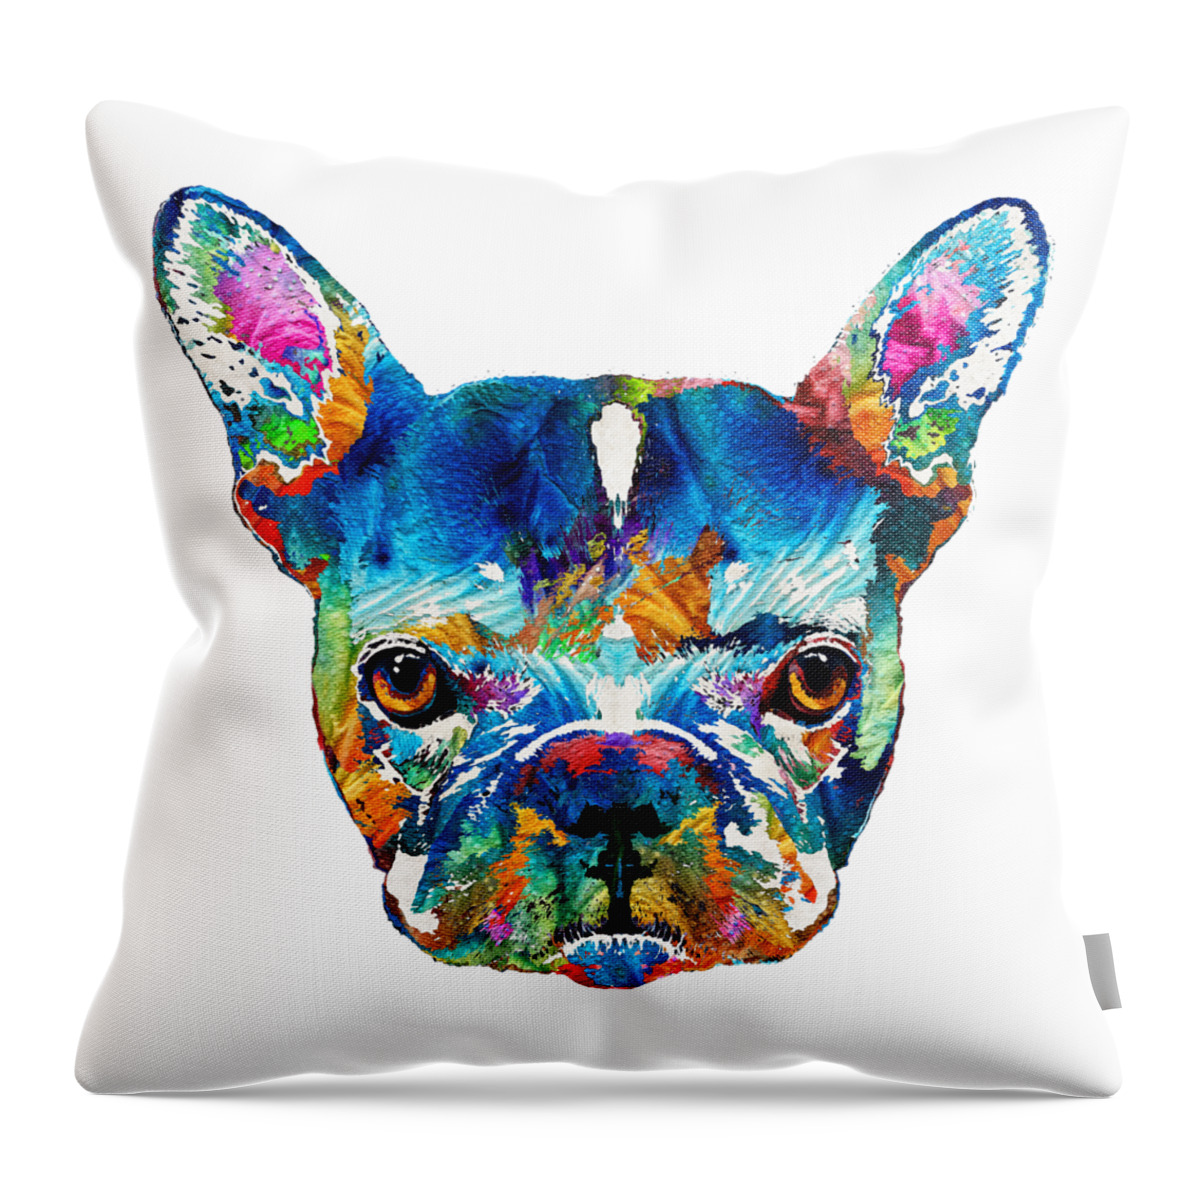 French Bulldog Throw Pillow featuring the painting Colorful French Bulldog Dog Art By Sharon Cummings by Sharon Cummings